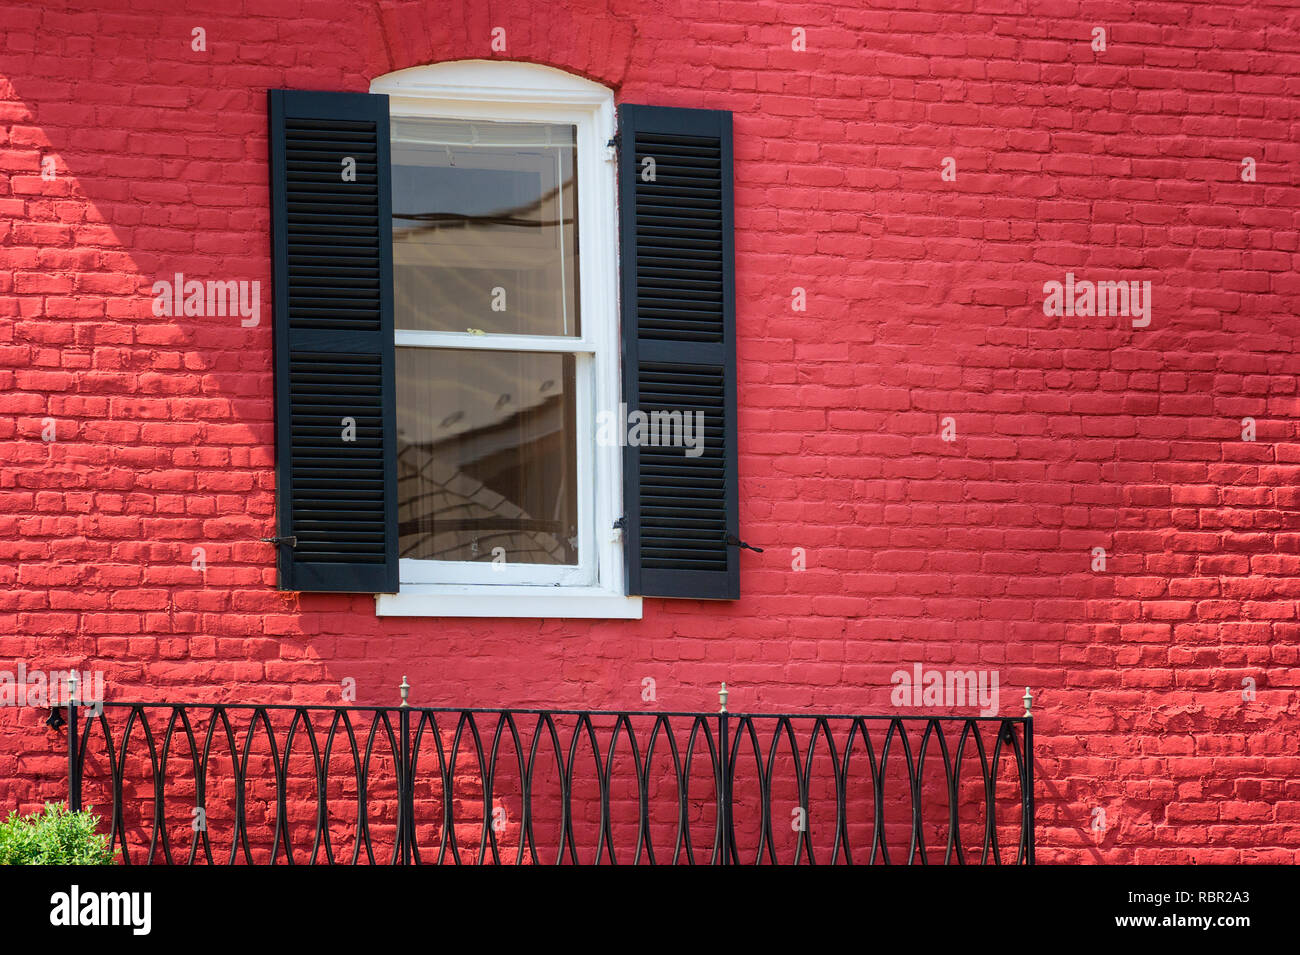 An exterior side of a red brick building with an iron railing, window framed with black shutters Stock Photo